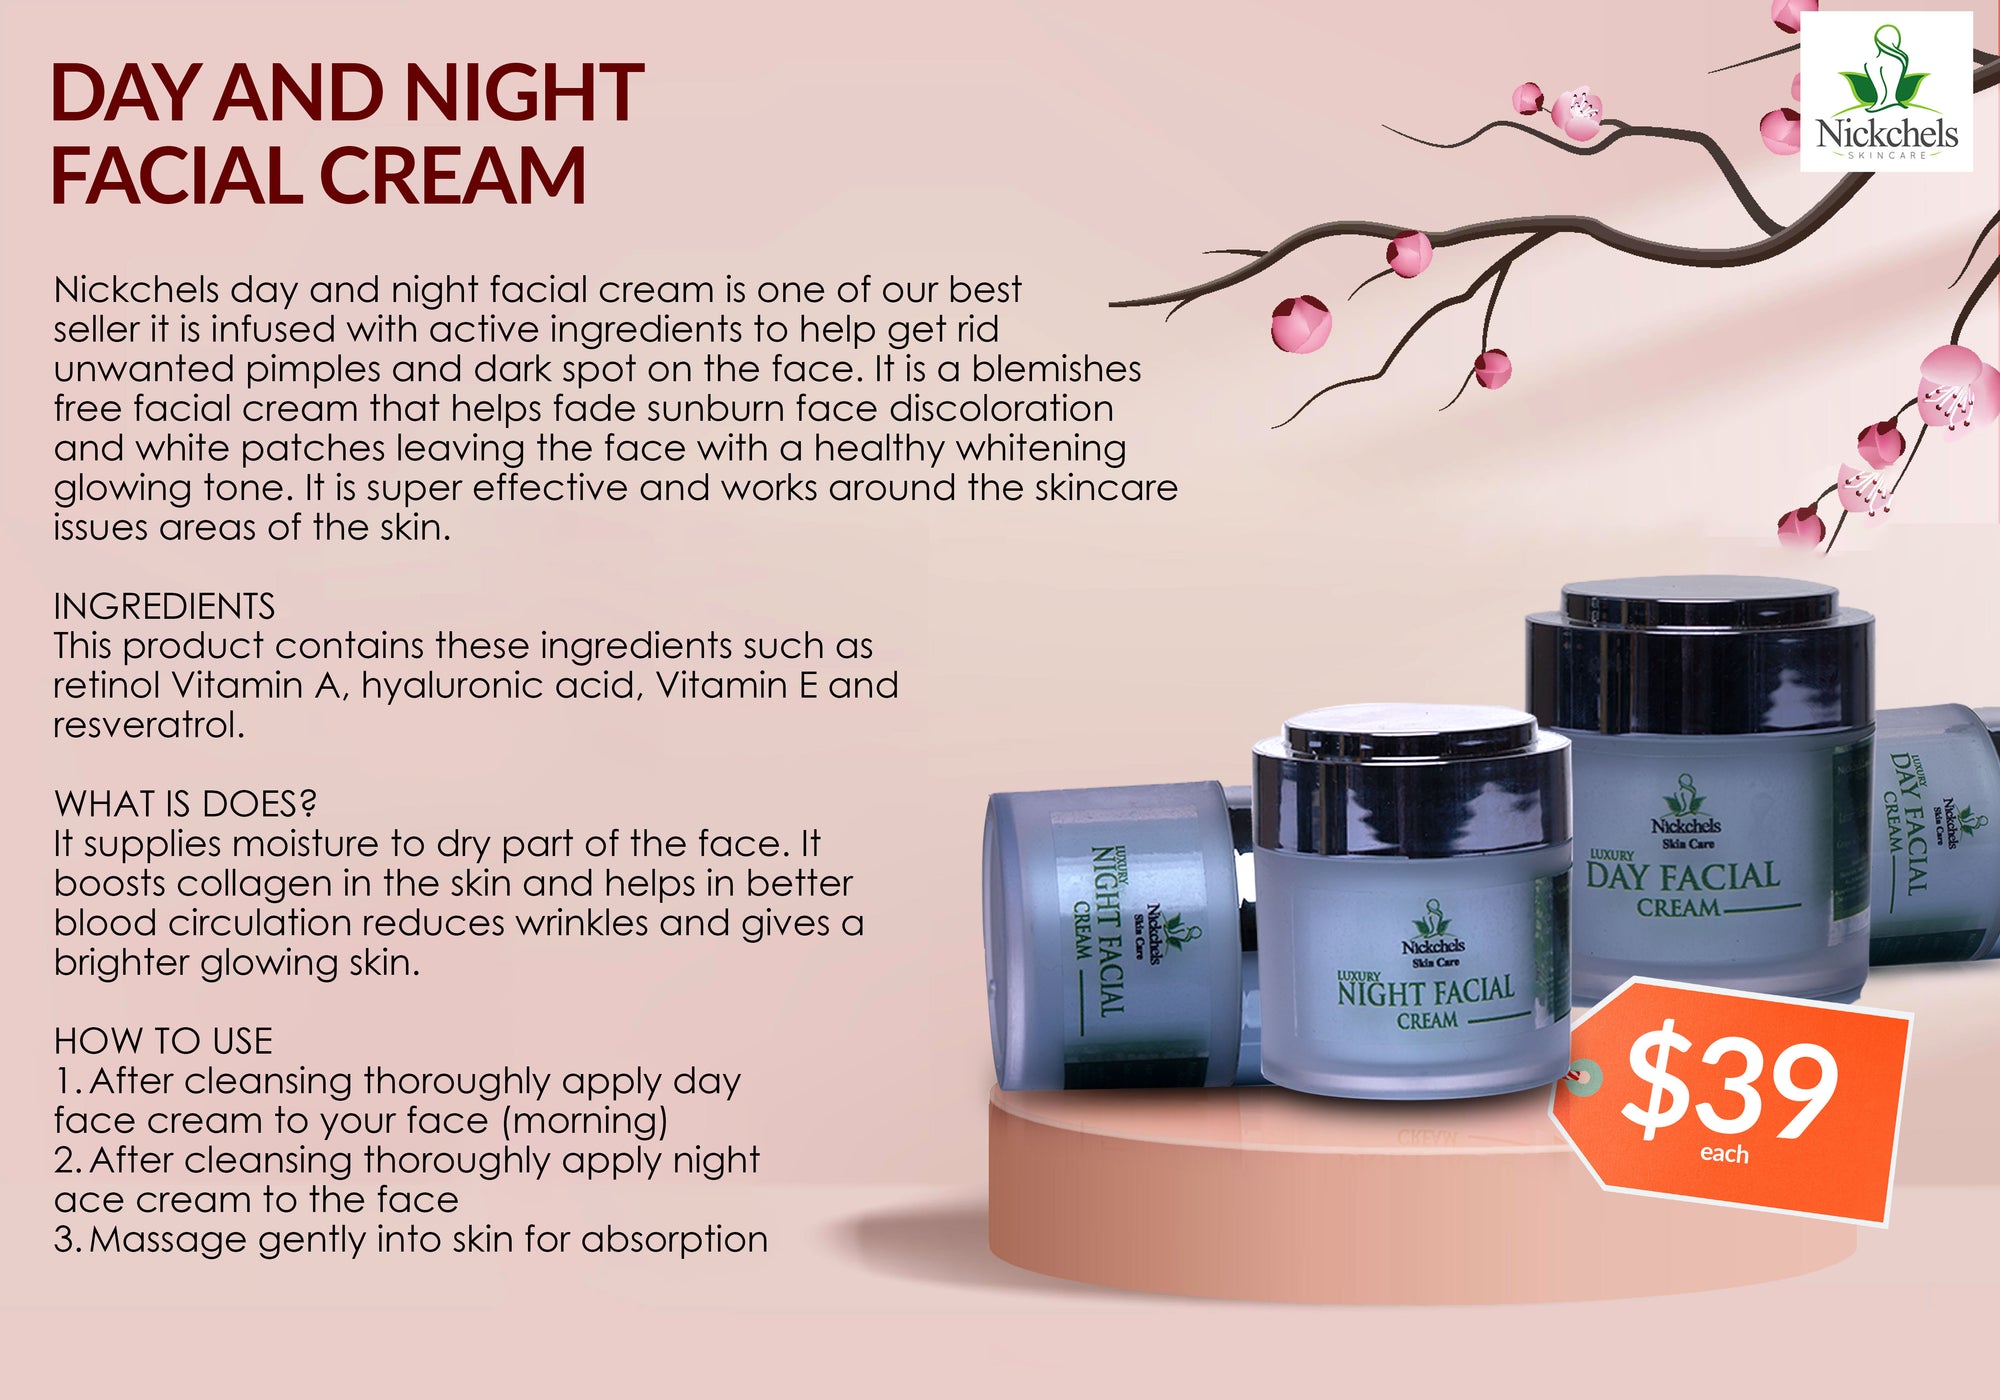 Day and Night facial cream